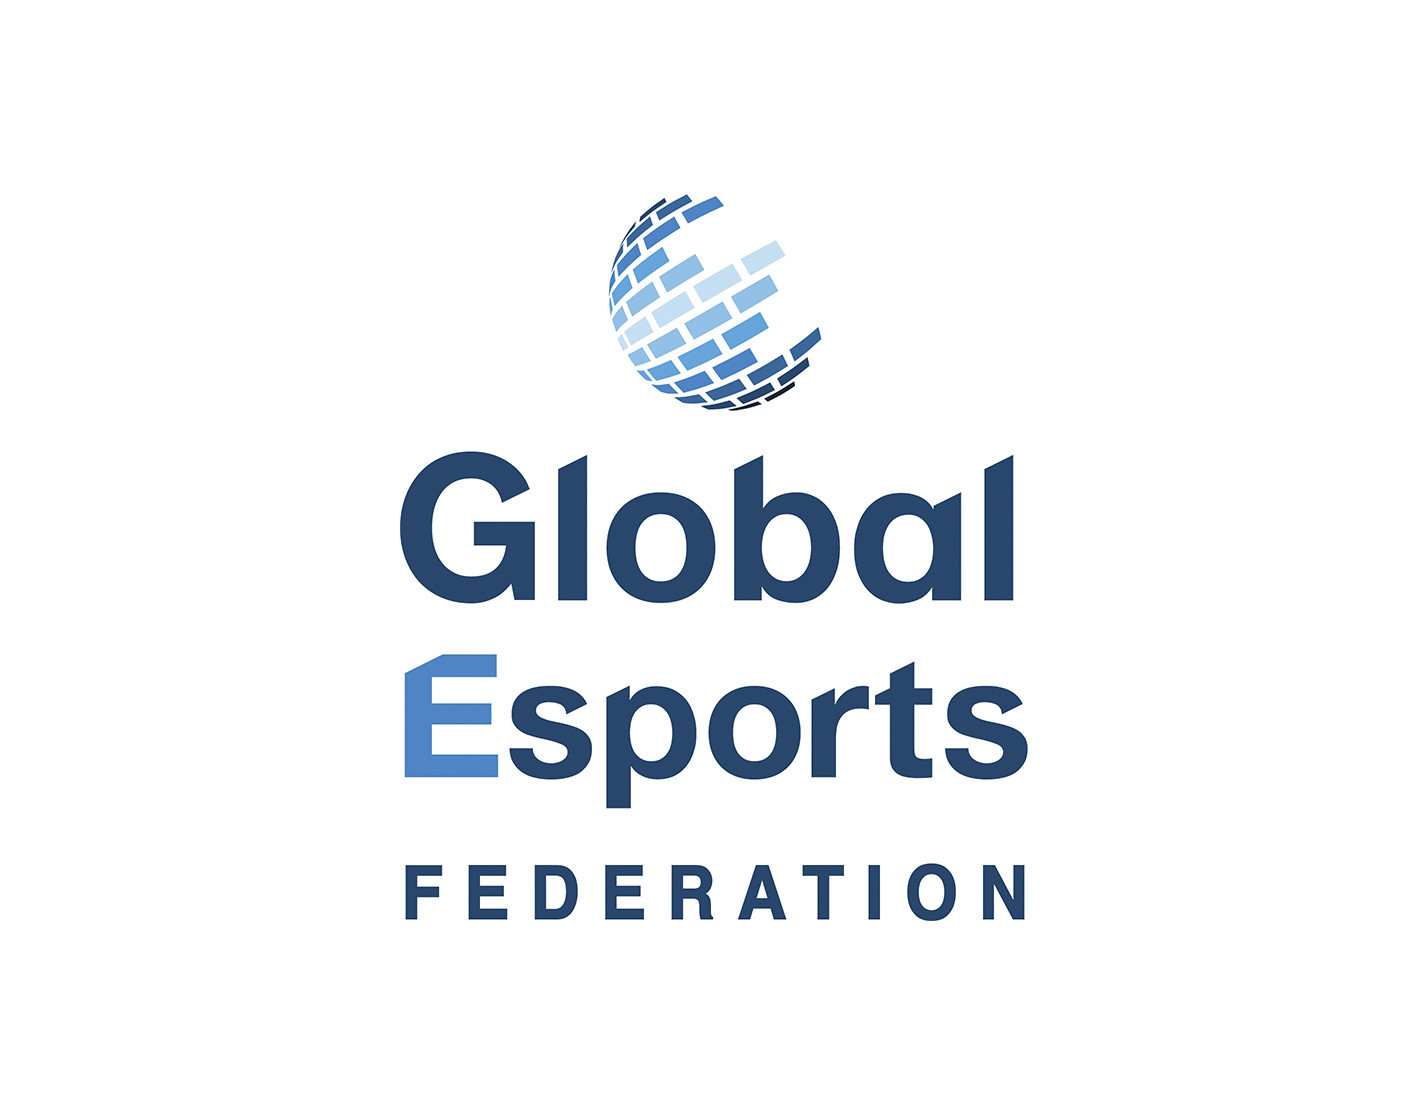 Global Esports Federation holds first General Assembly as one-year anniversary celebrated